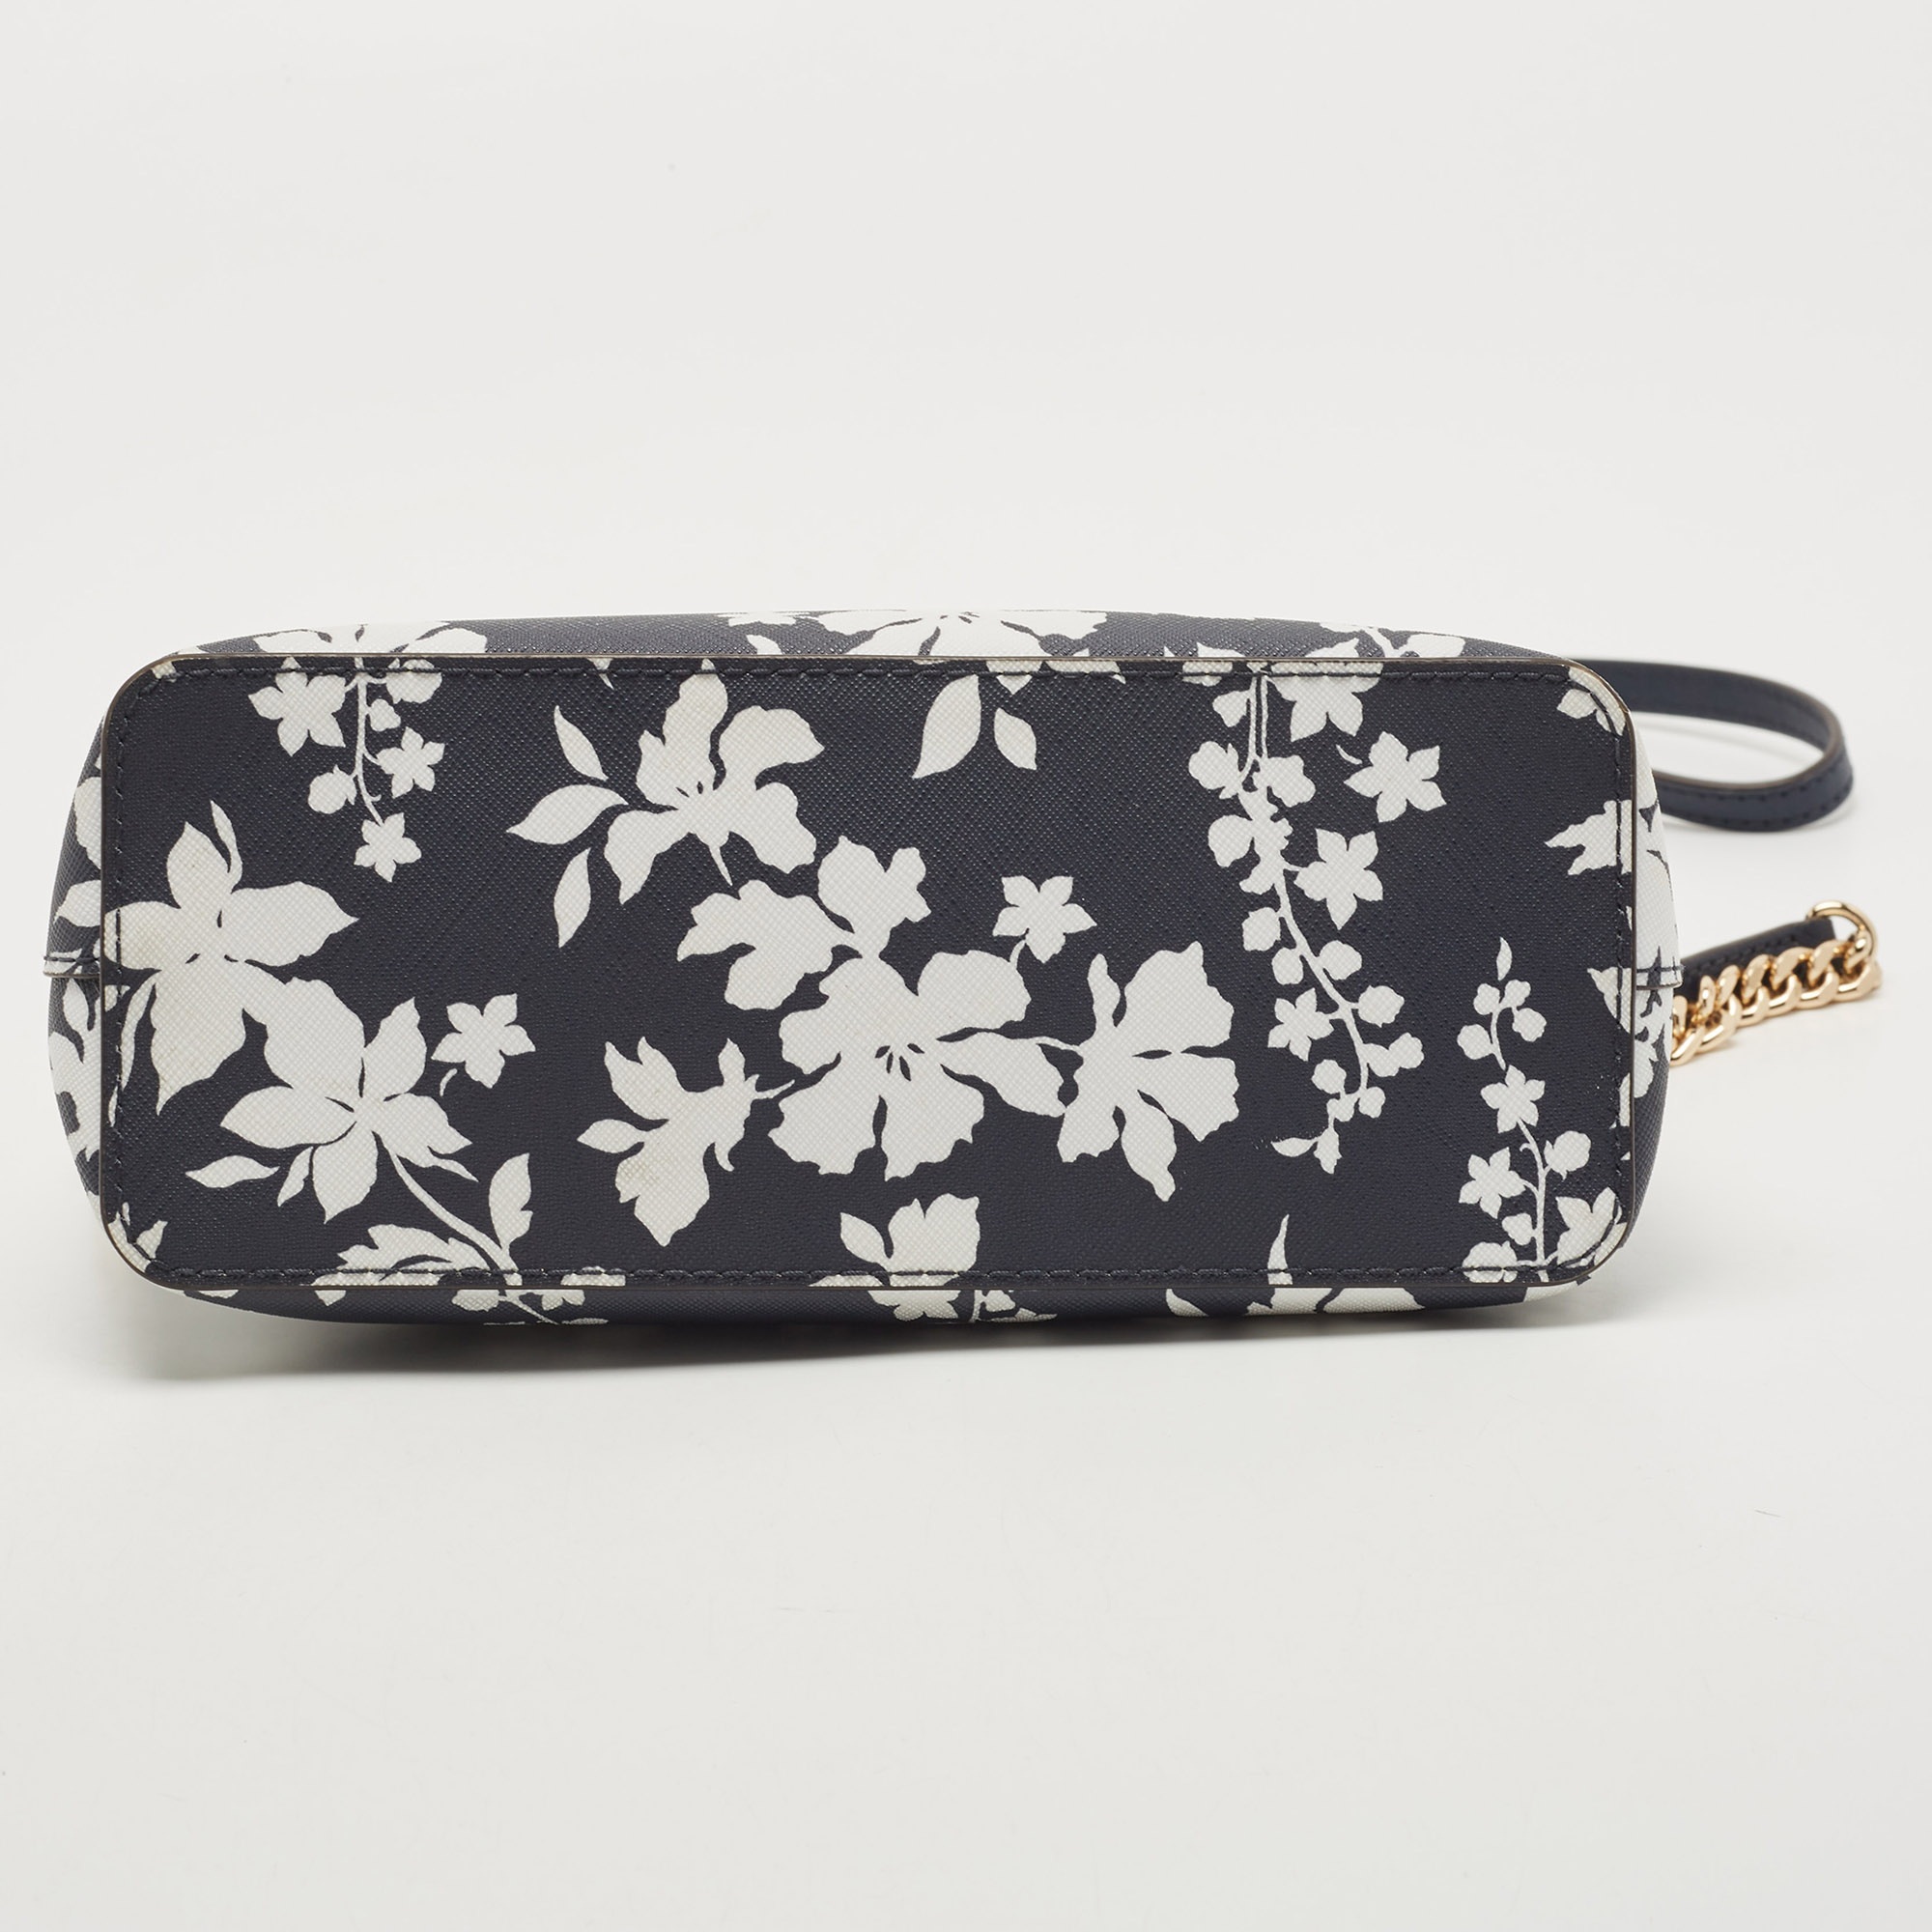 Michael Kors Navy Blue/White Leather Floral Dome Crossbody Bag